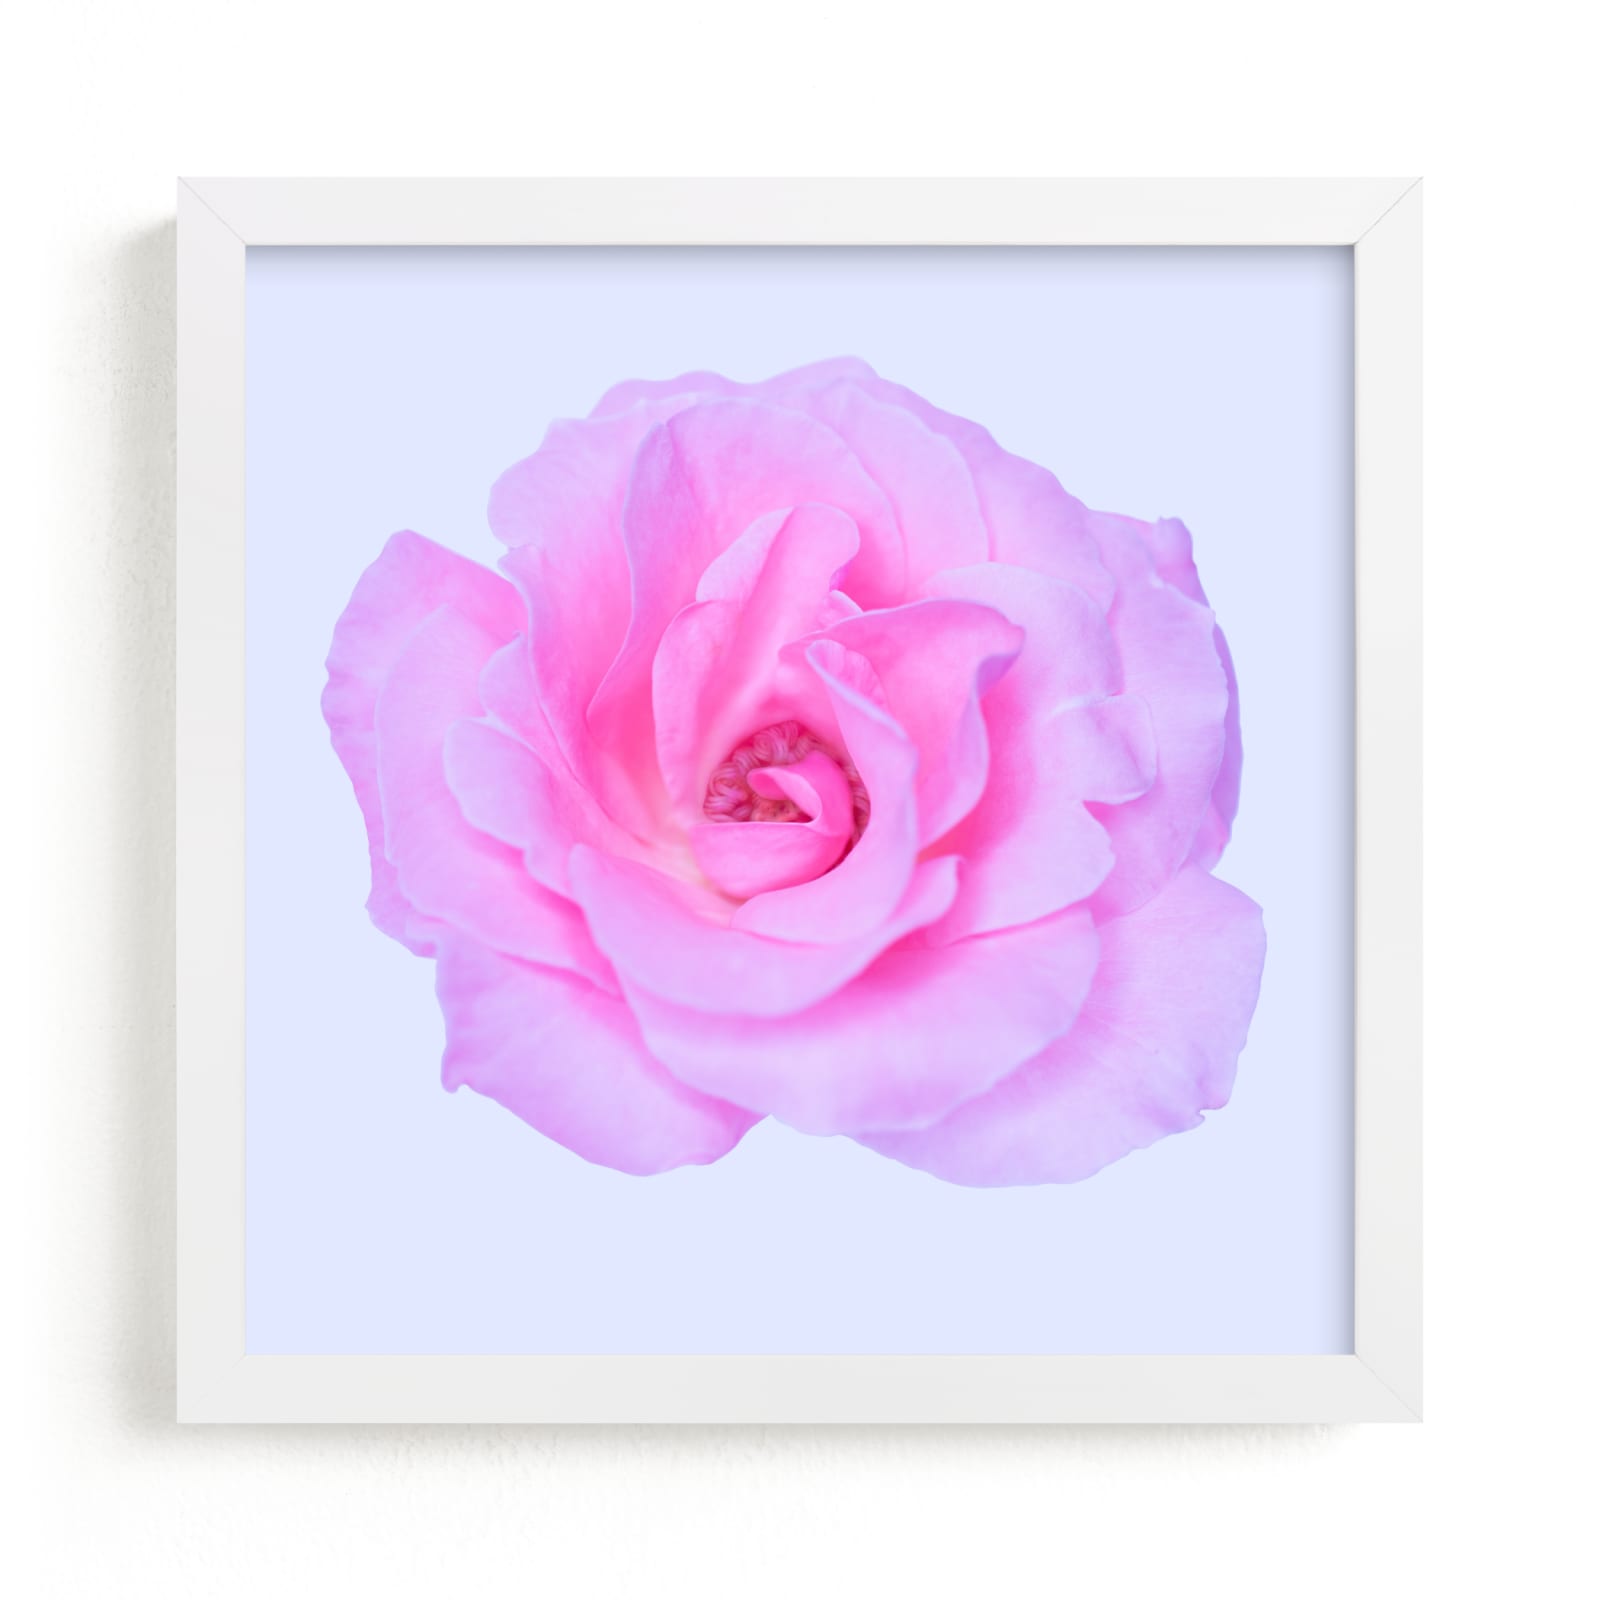 Pink Flower Poster, Roses Photography, Pink Roses Print, Pink